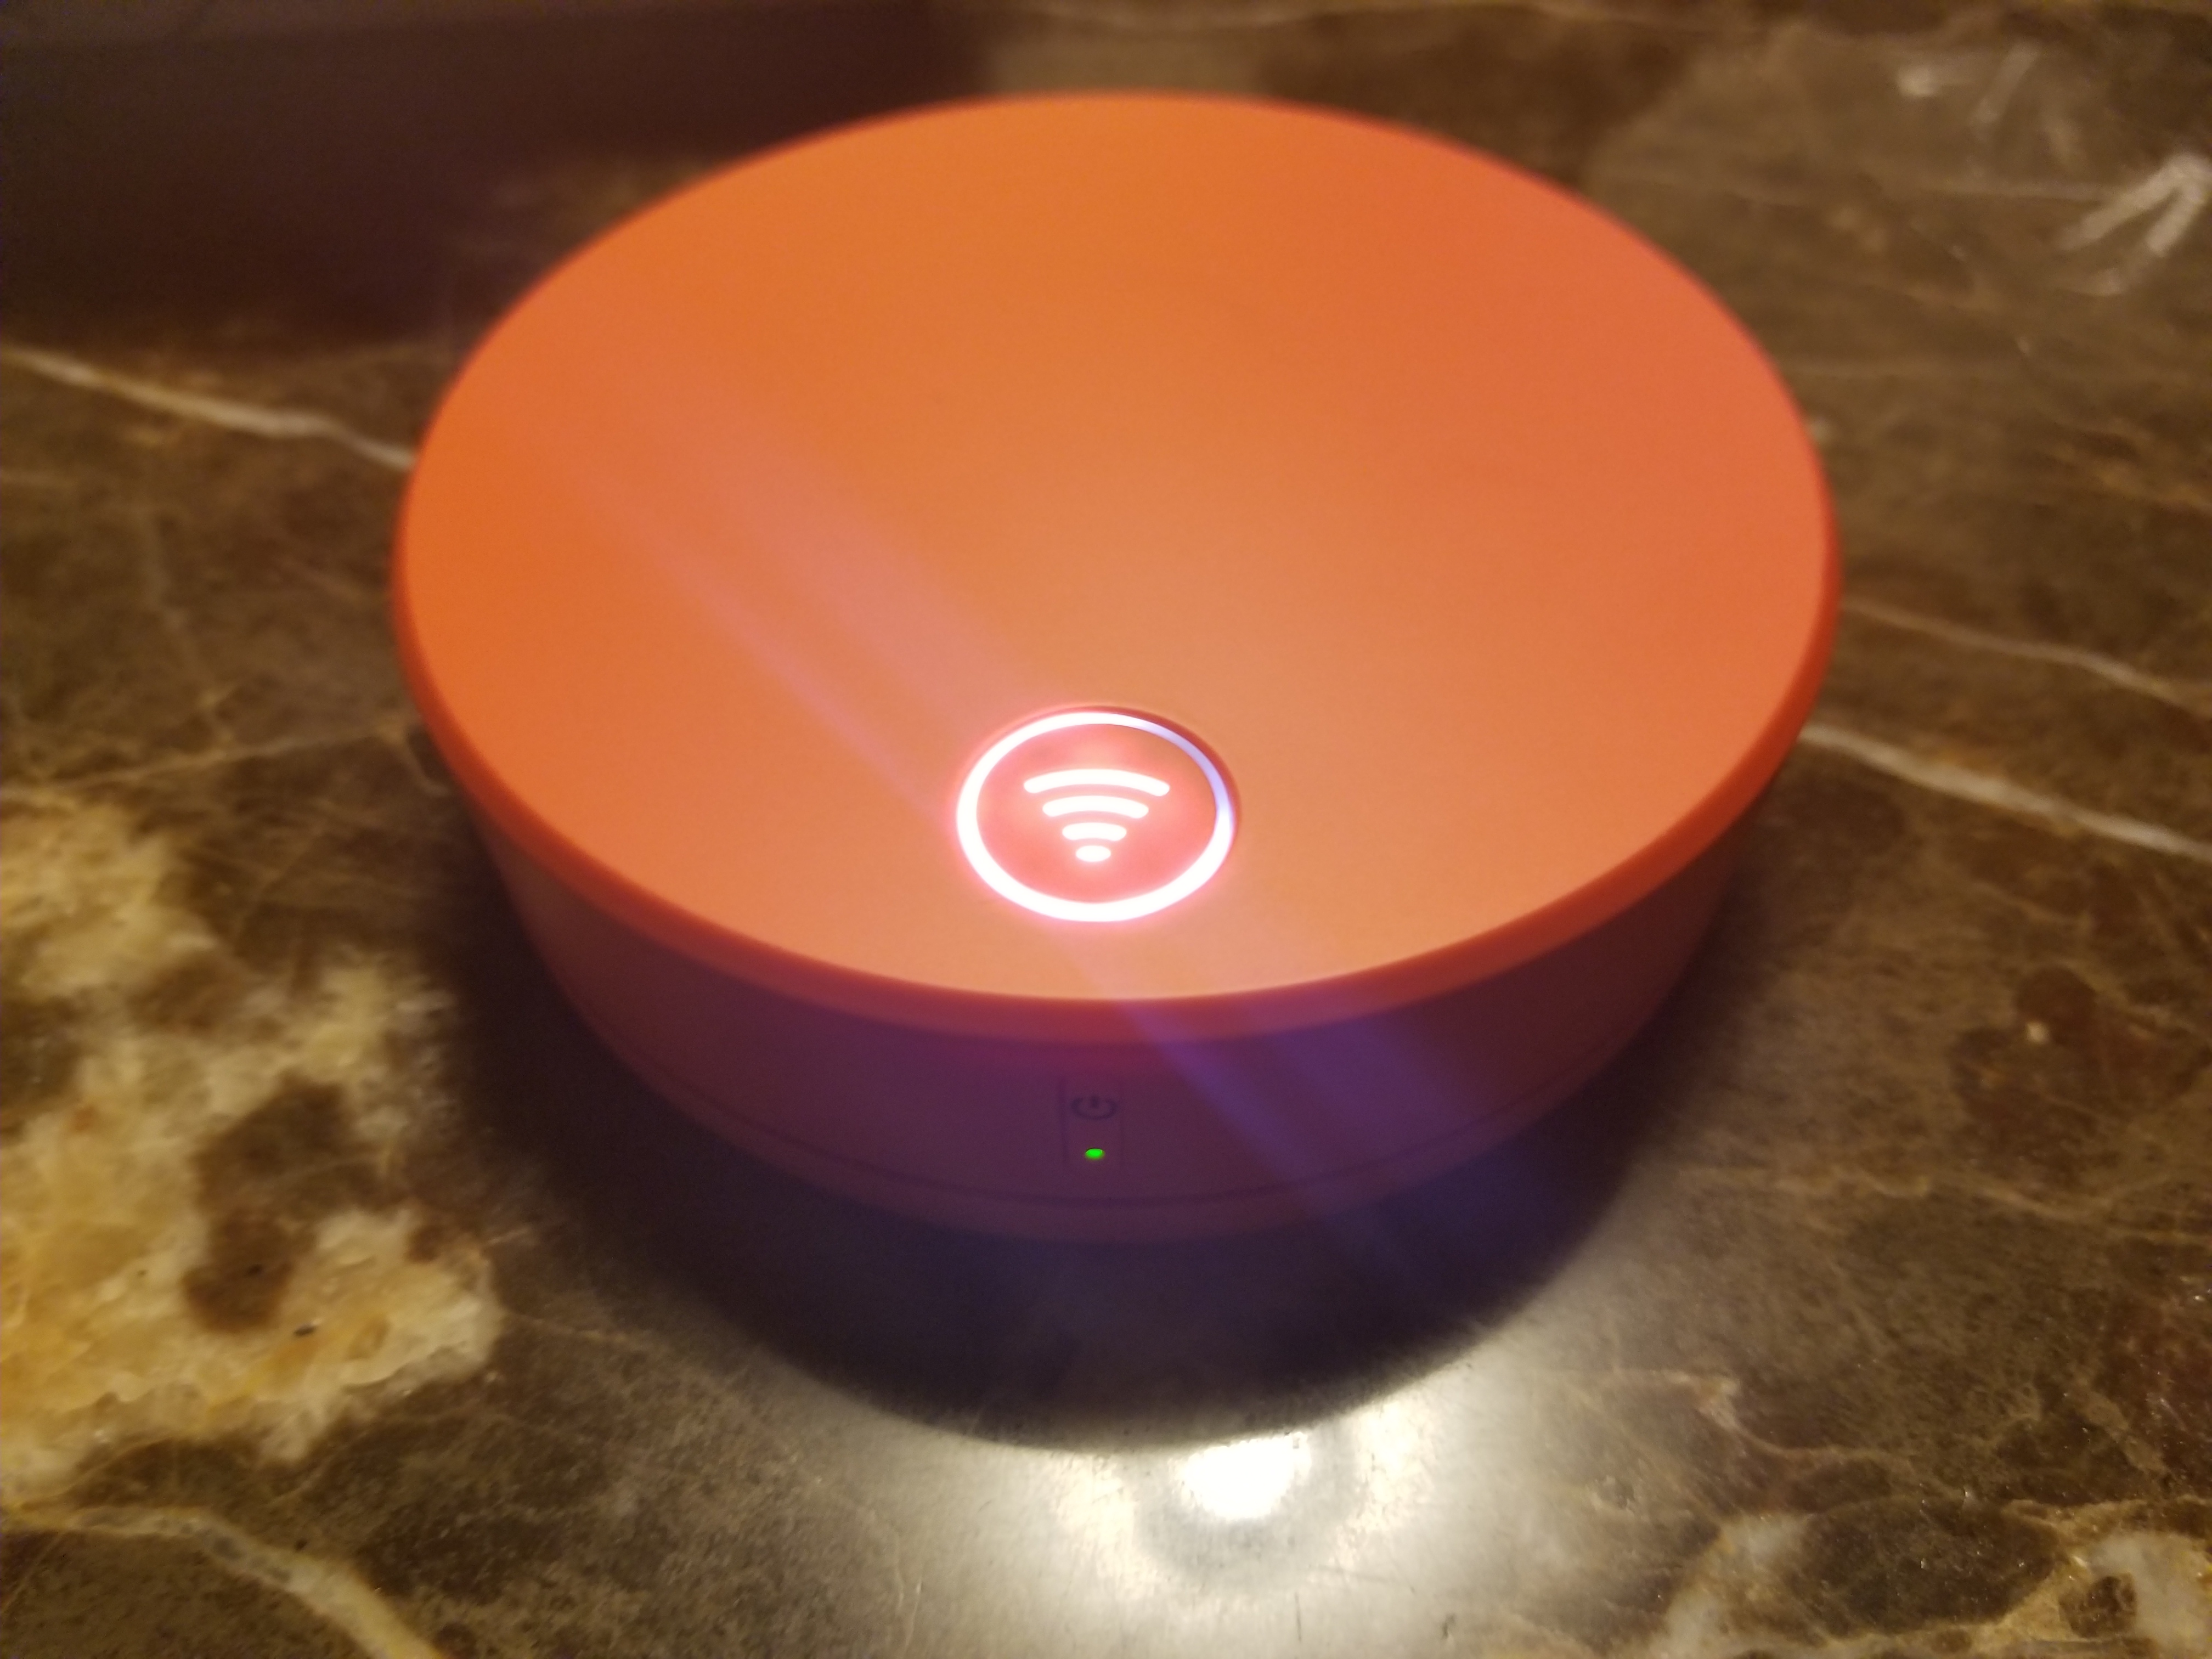 an orange round object with a wifi symbol on it